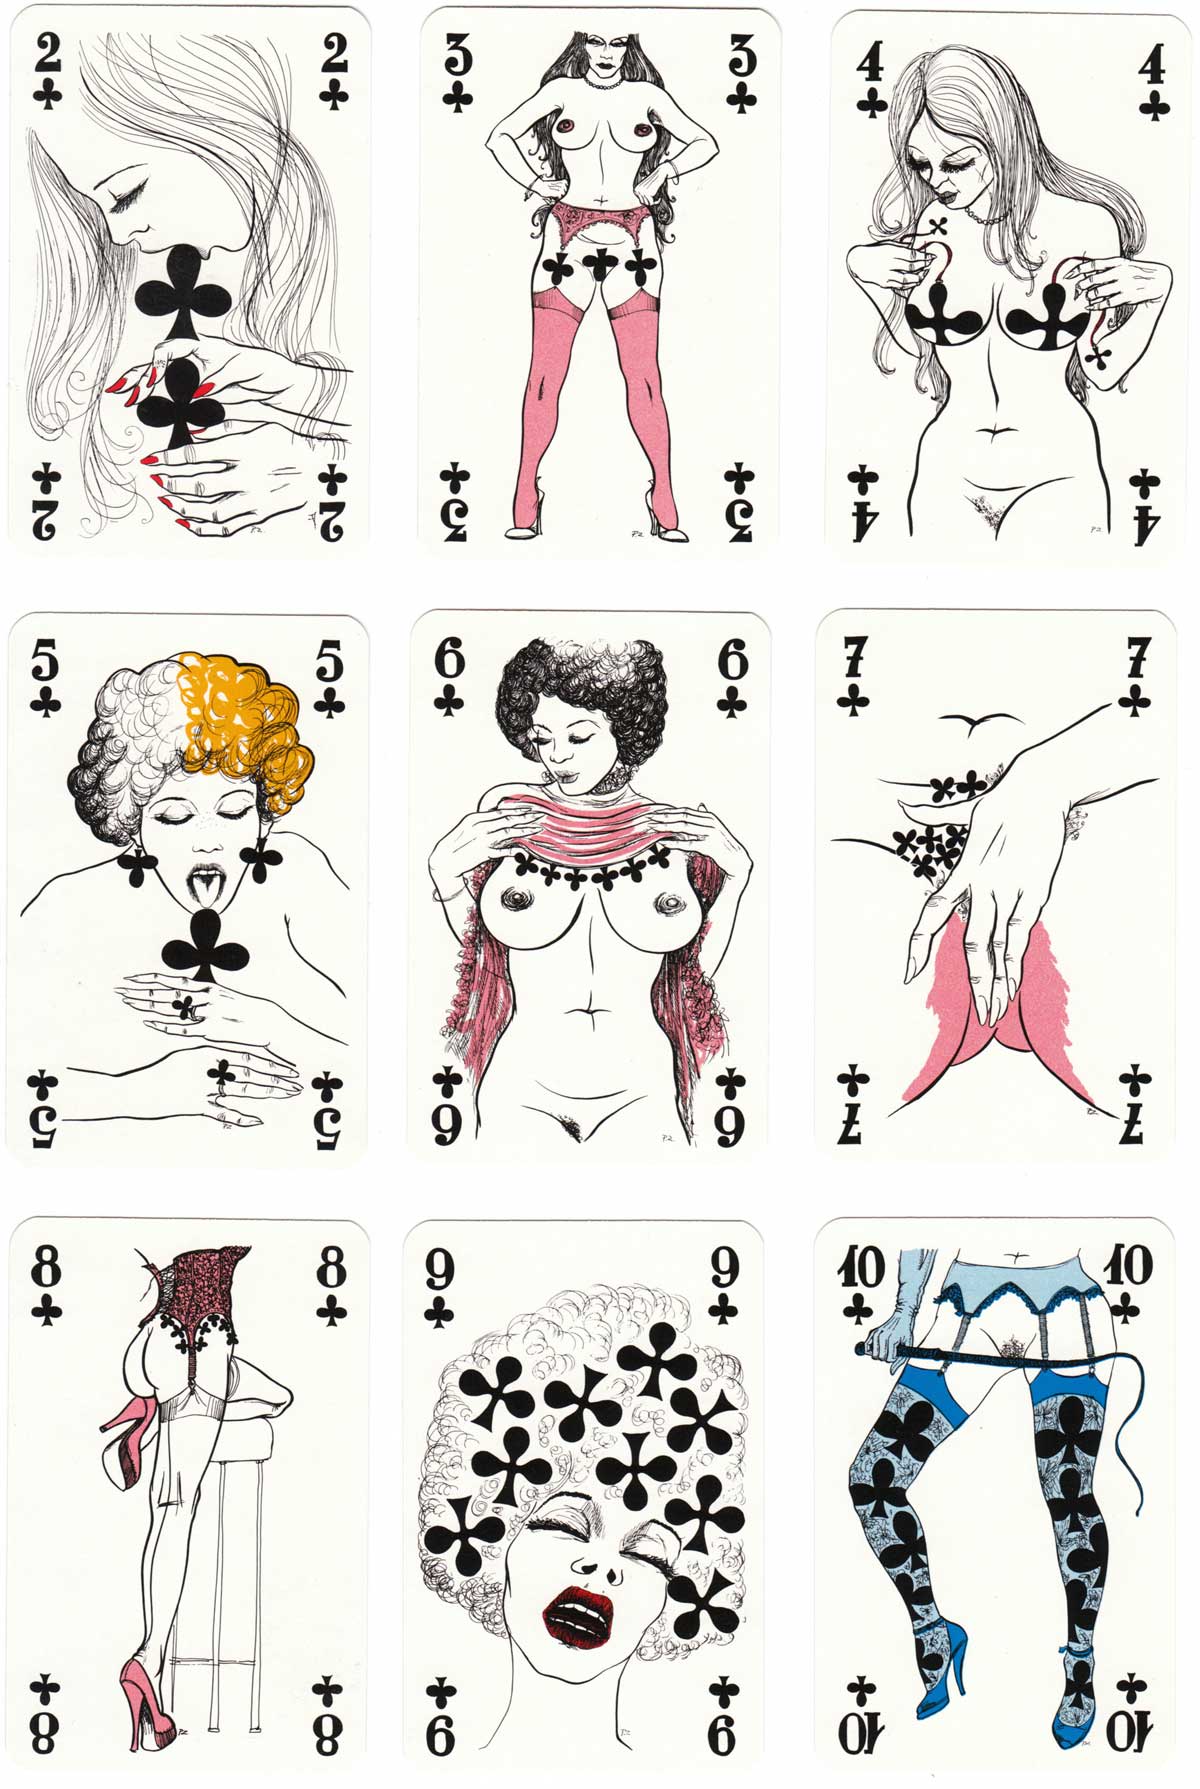 Eroticartes with drawings by Pino Zac, 1983